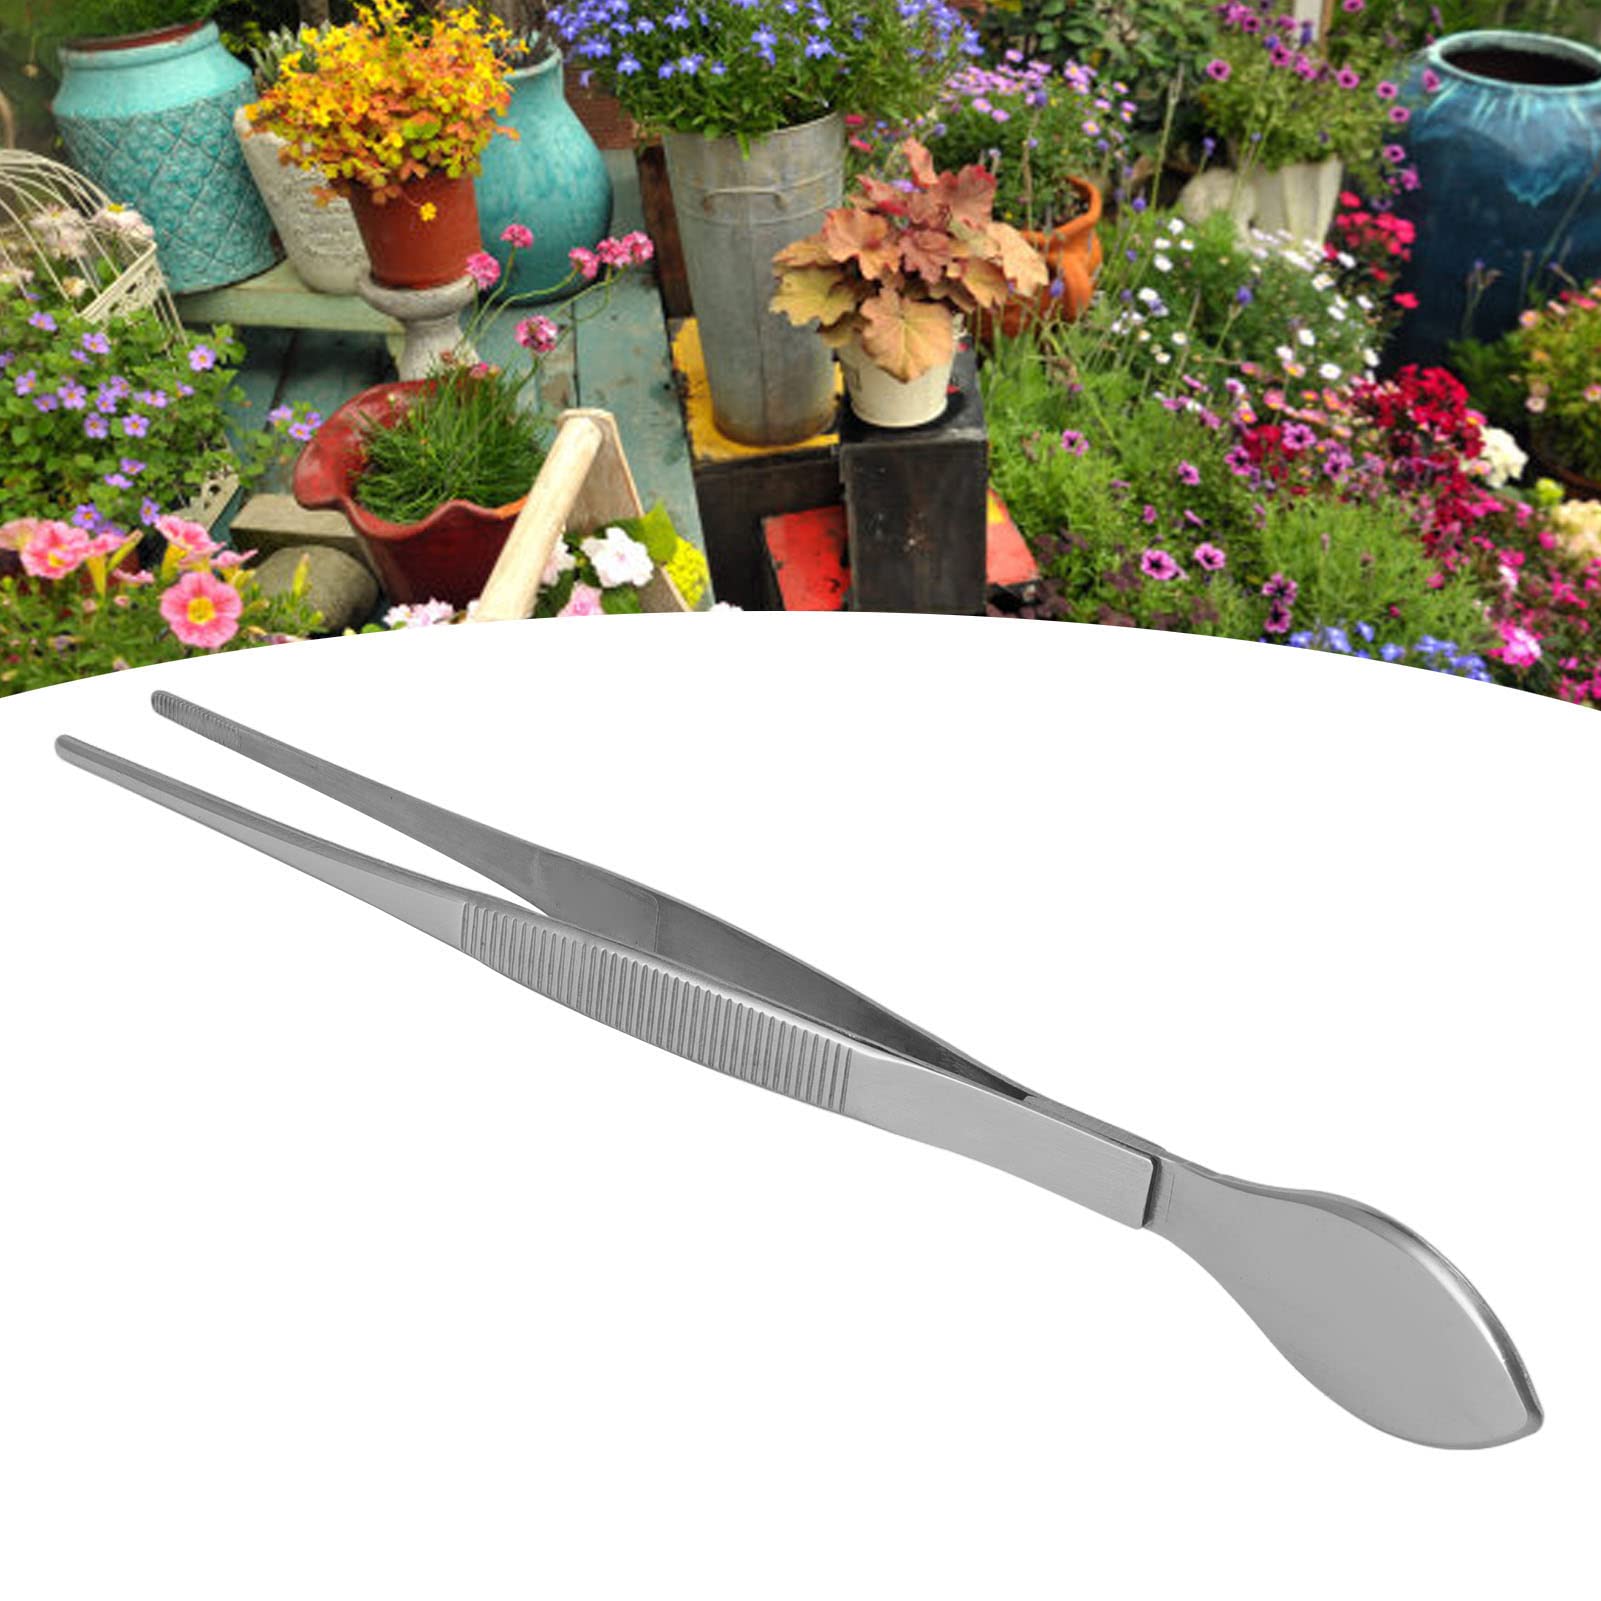 Cyrank Bonsai Tweezers, 2Pcs Long Handle Stainless Steel Straight Plant Soil Loosening Spatula Set with Serrated Tips Comfortable Ridged Handle for Garden Kitchen